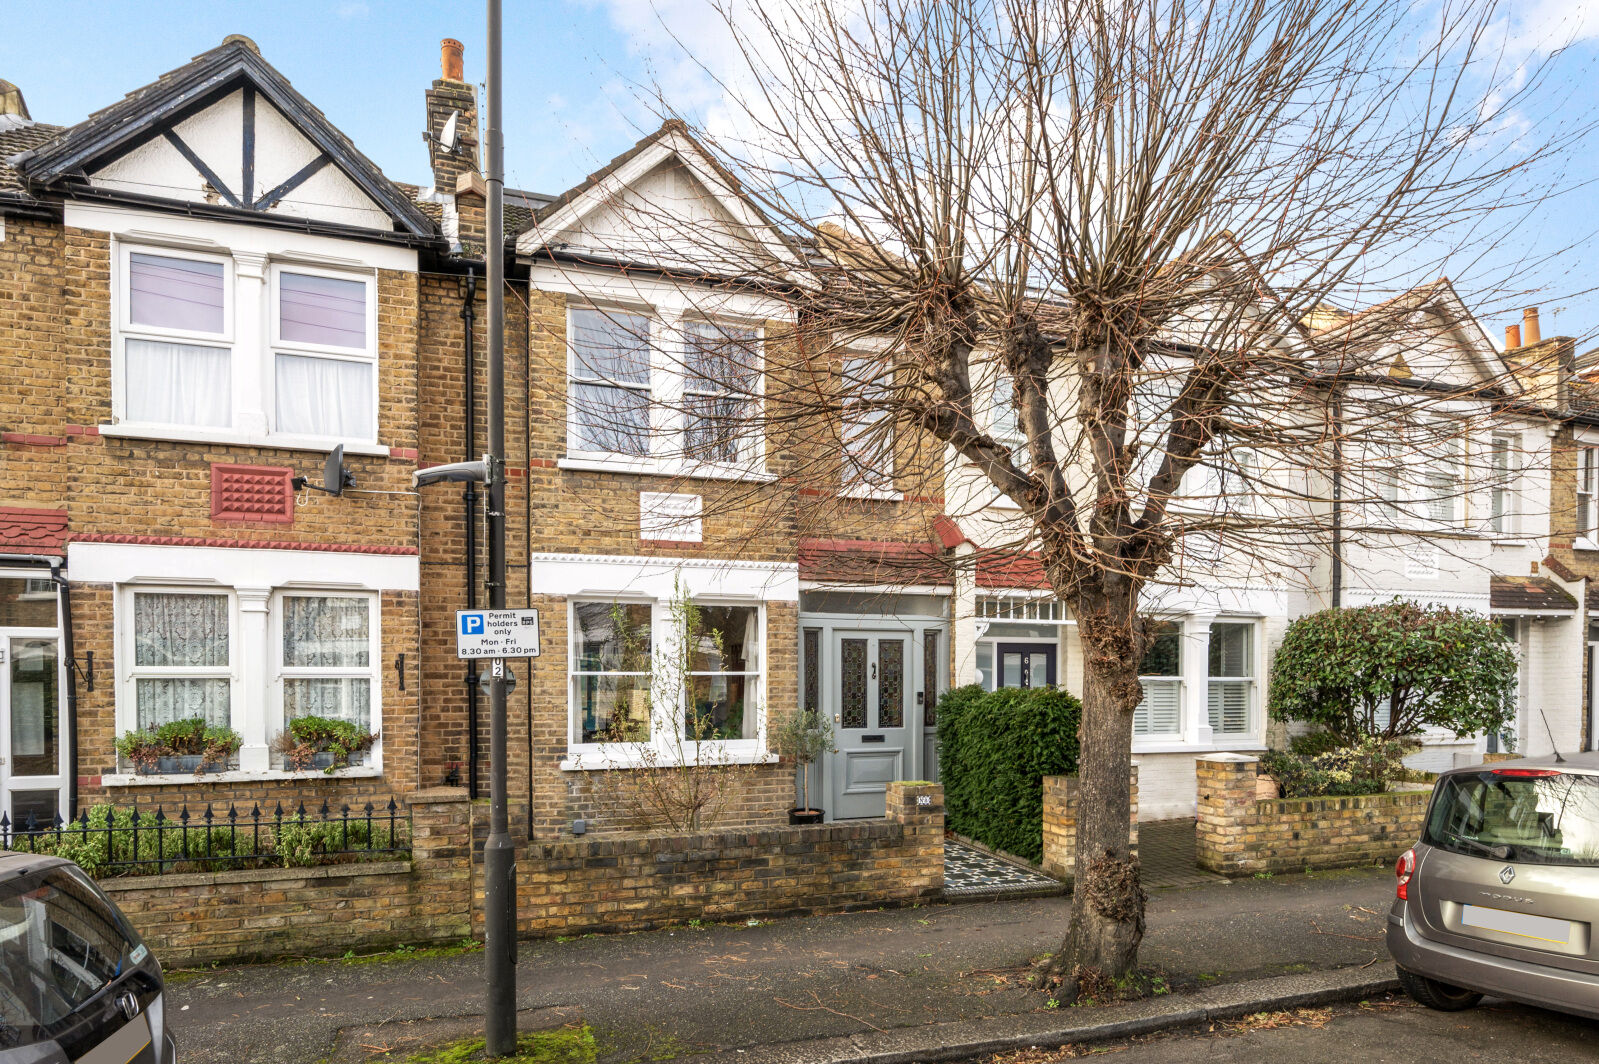 3 bedroom mid terraced house for sale Aston Road, Raynes Park, SW20, main image